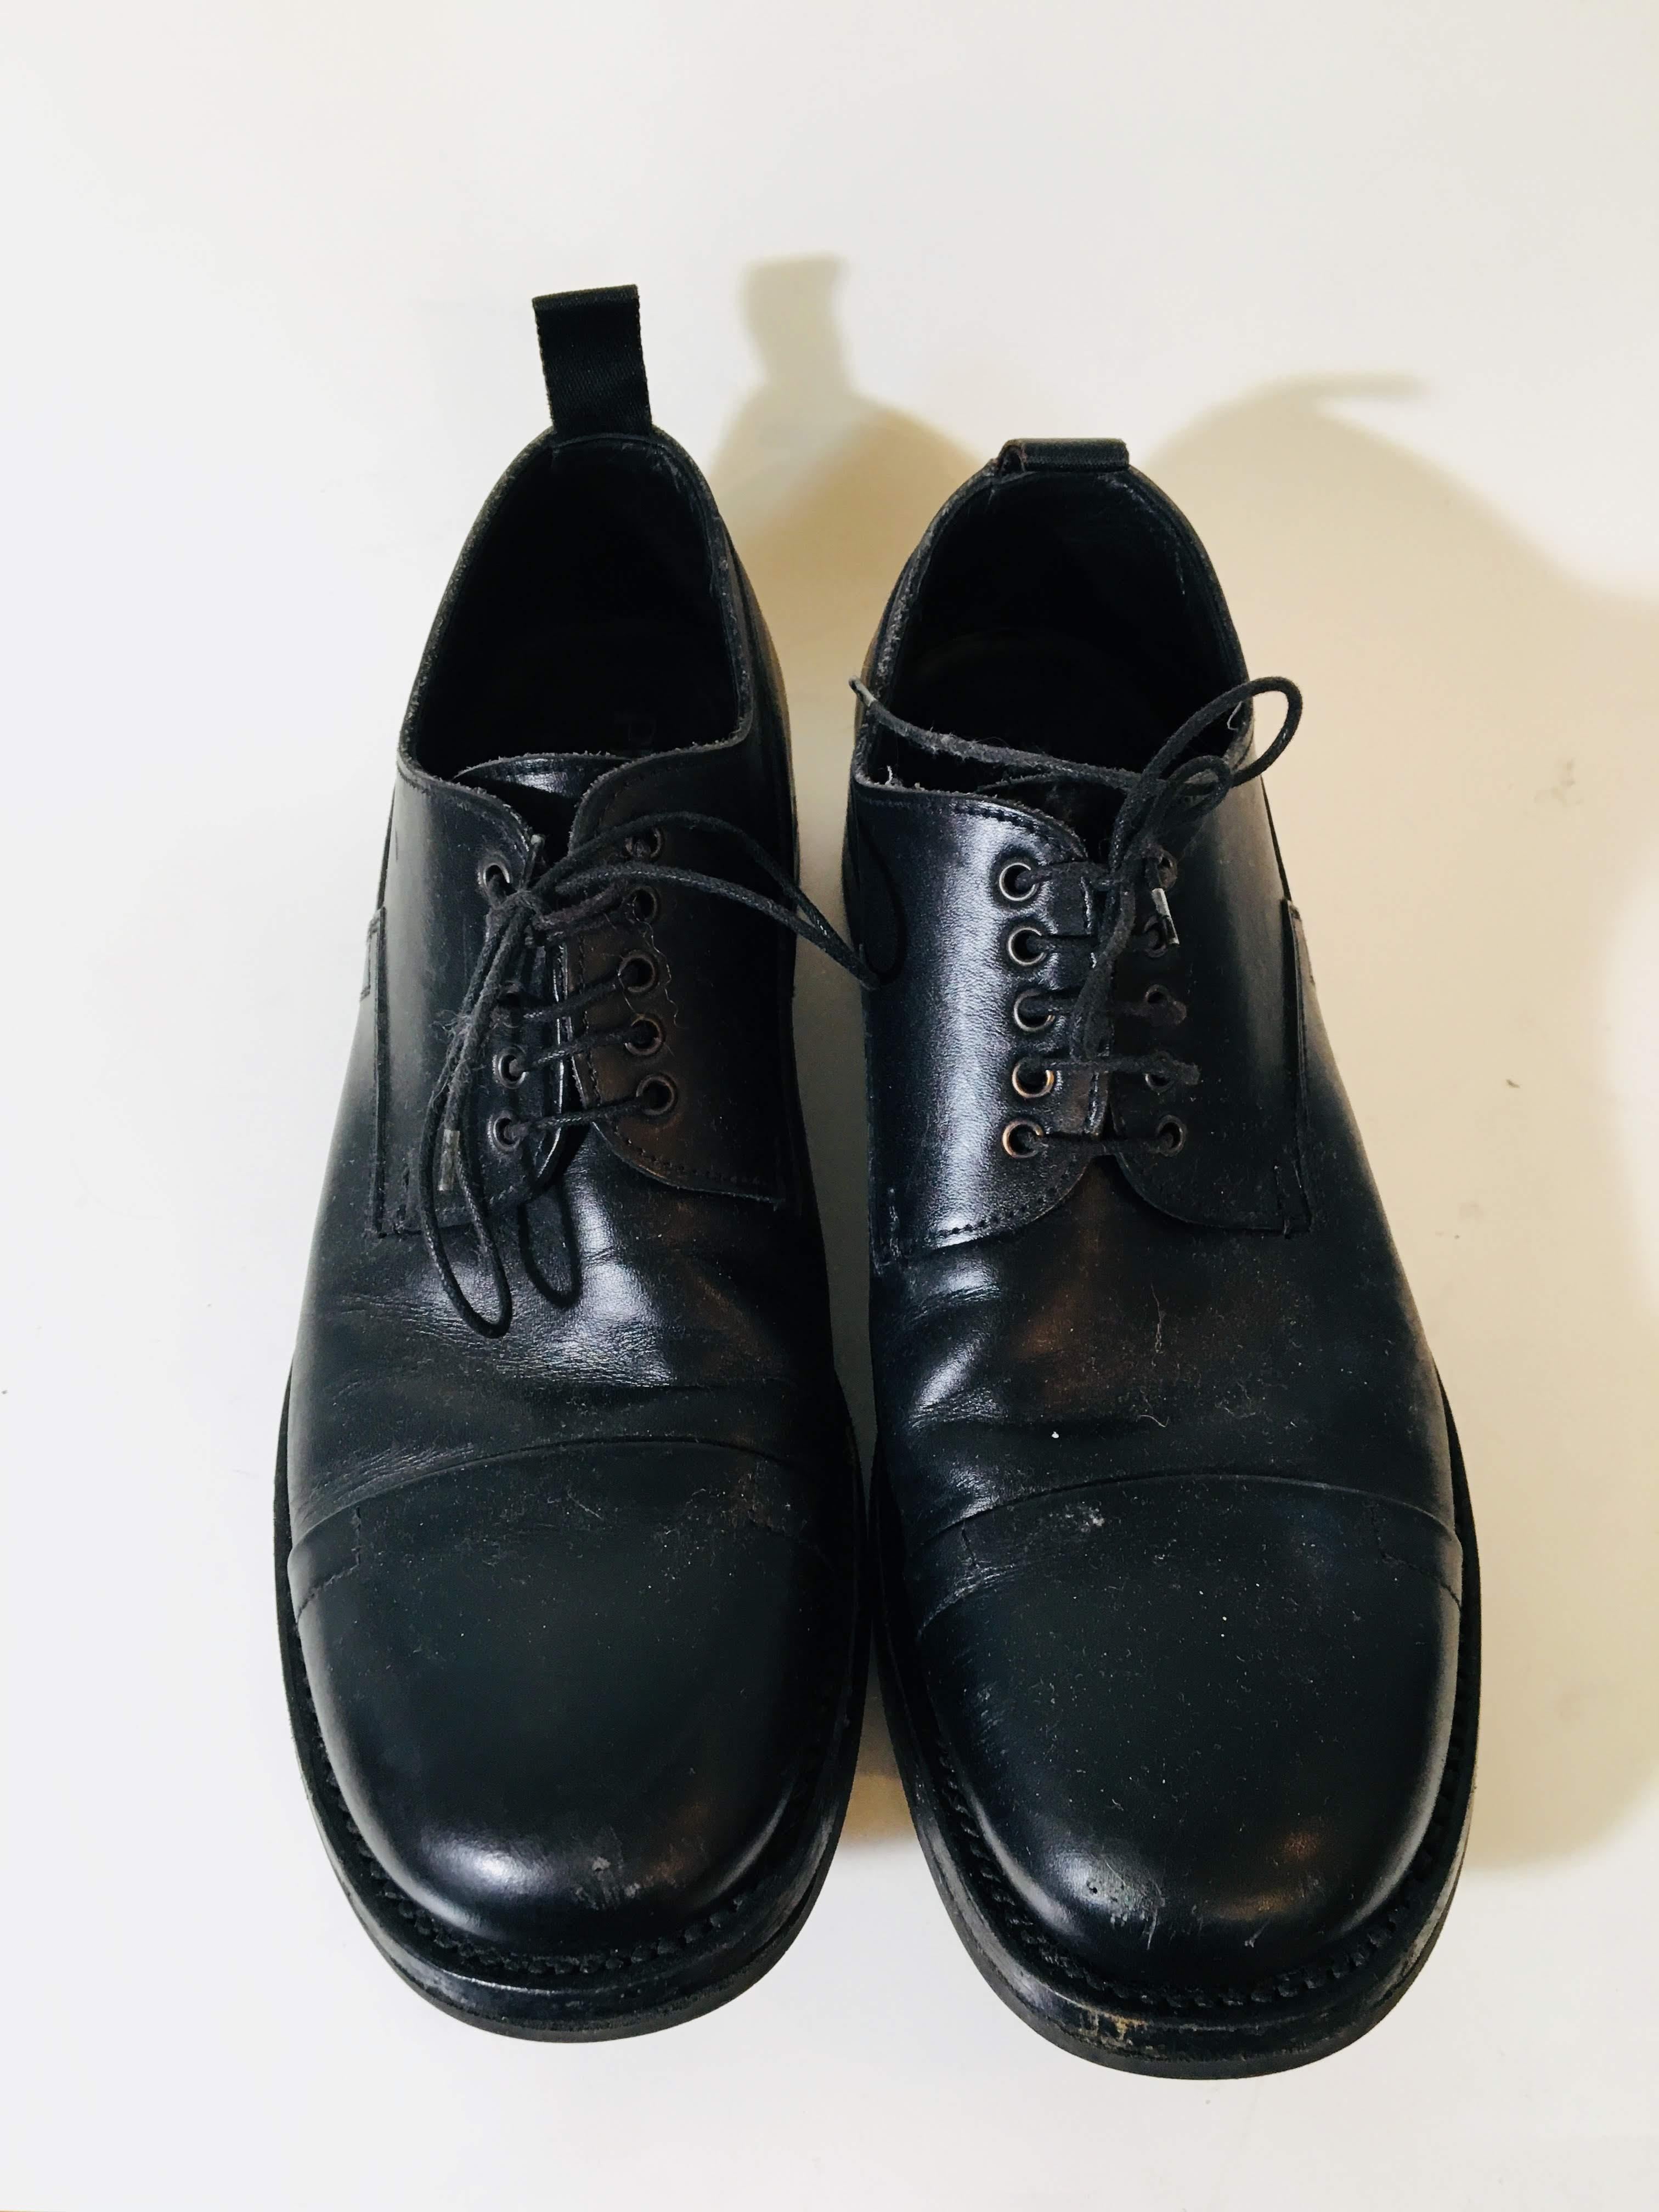 Black Leather Prada Dress Shoes.Oxford Style Lace up with Round Toe in Size 7.5